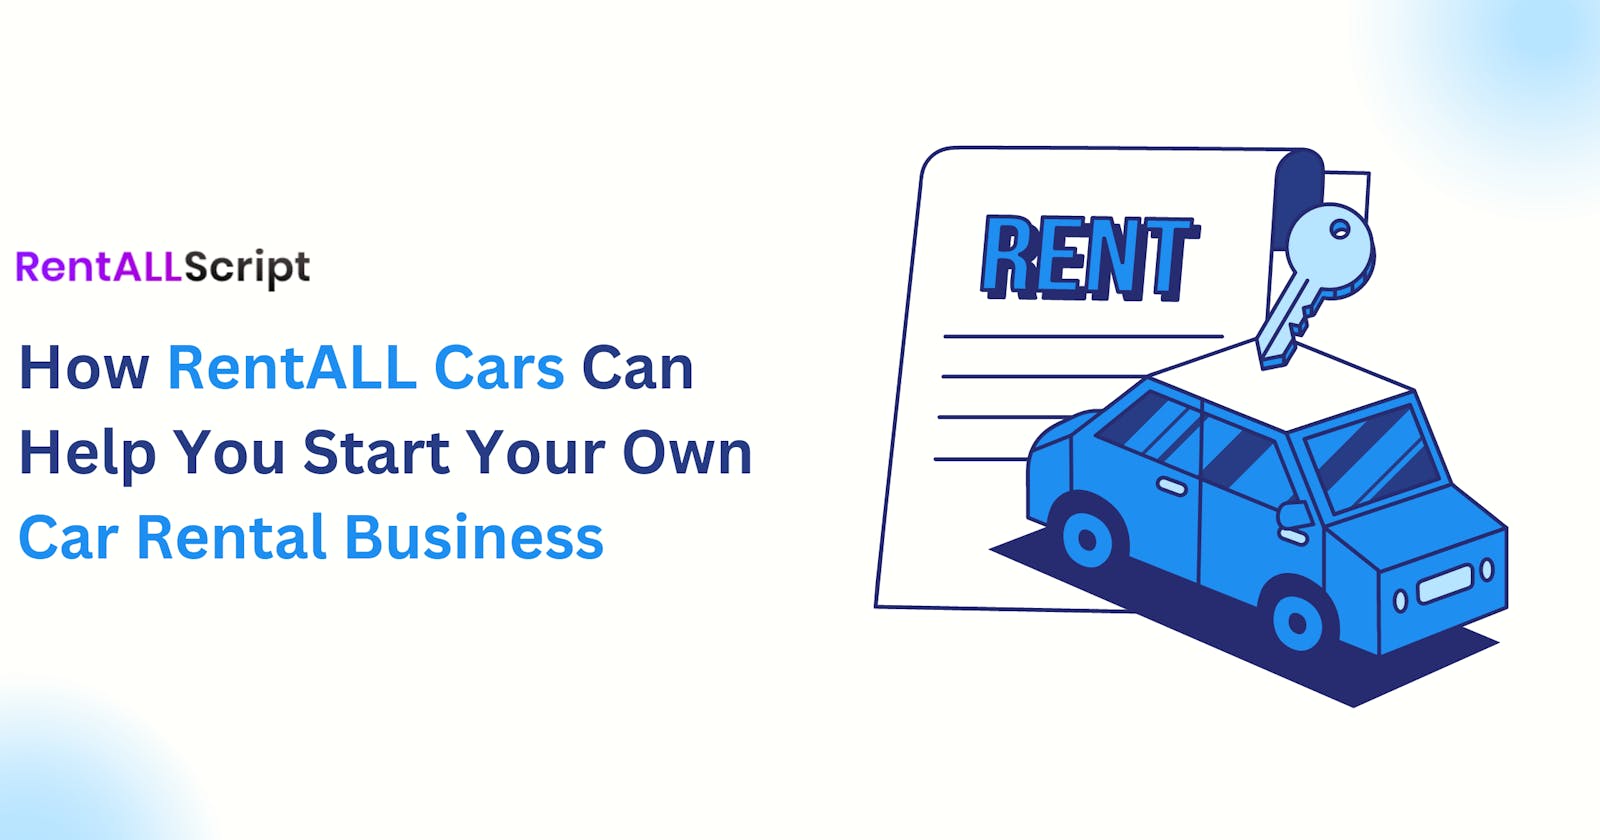 How RentALL Cars Can Help You Start Your Own Car Rental Business